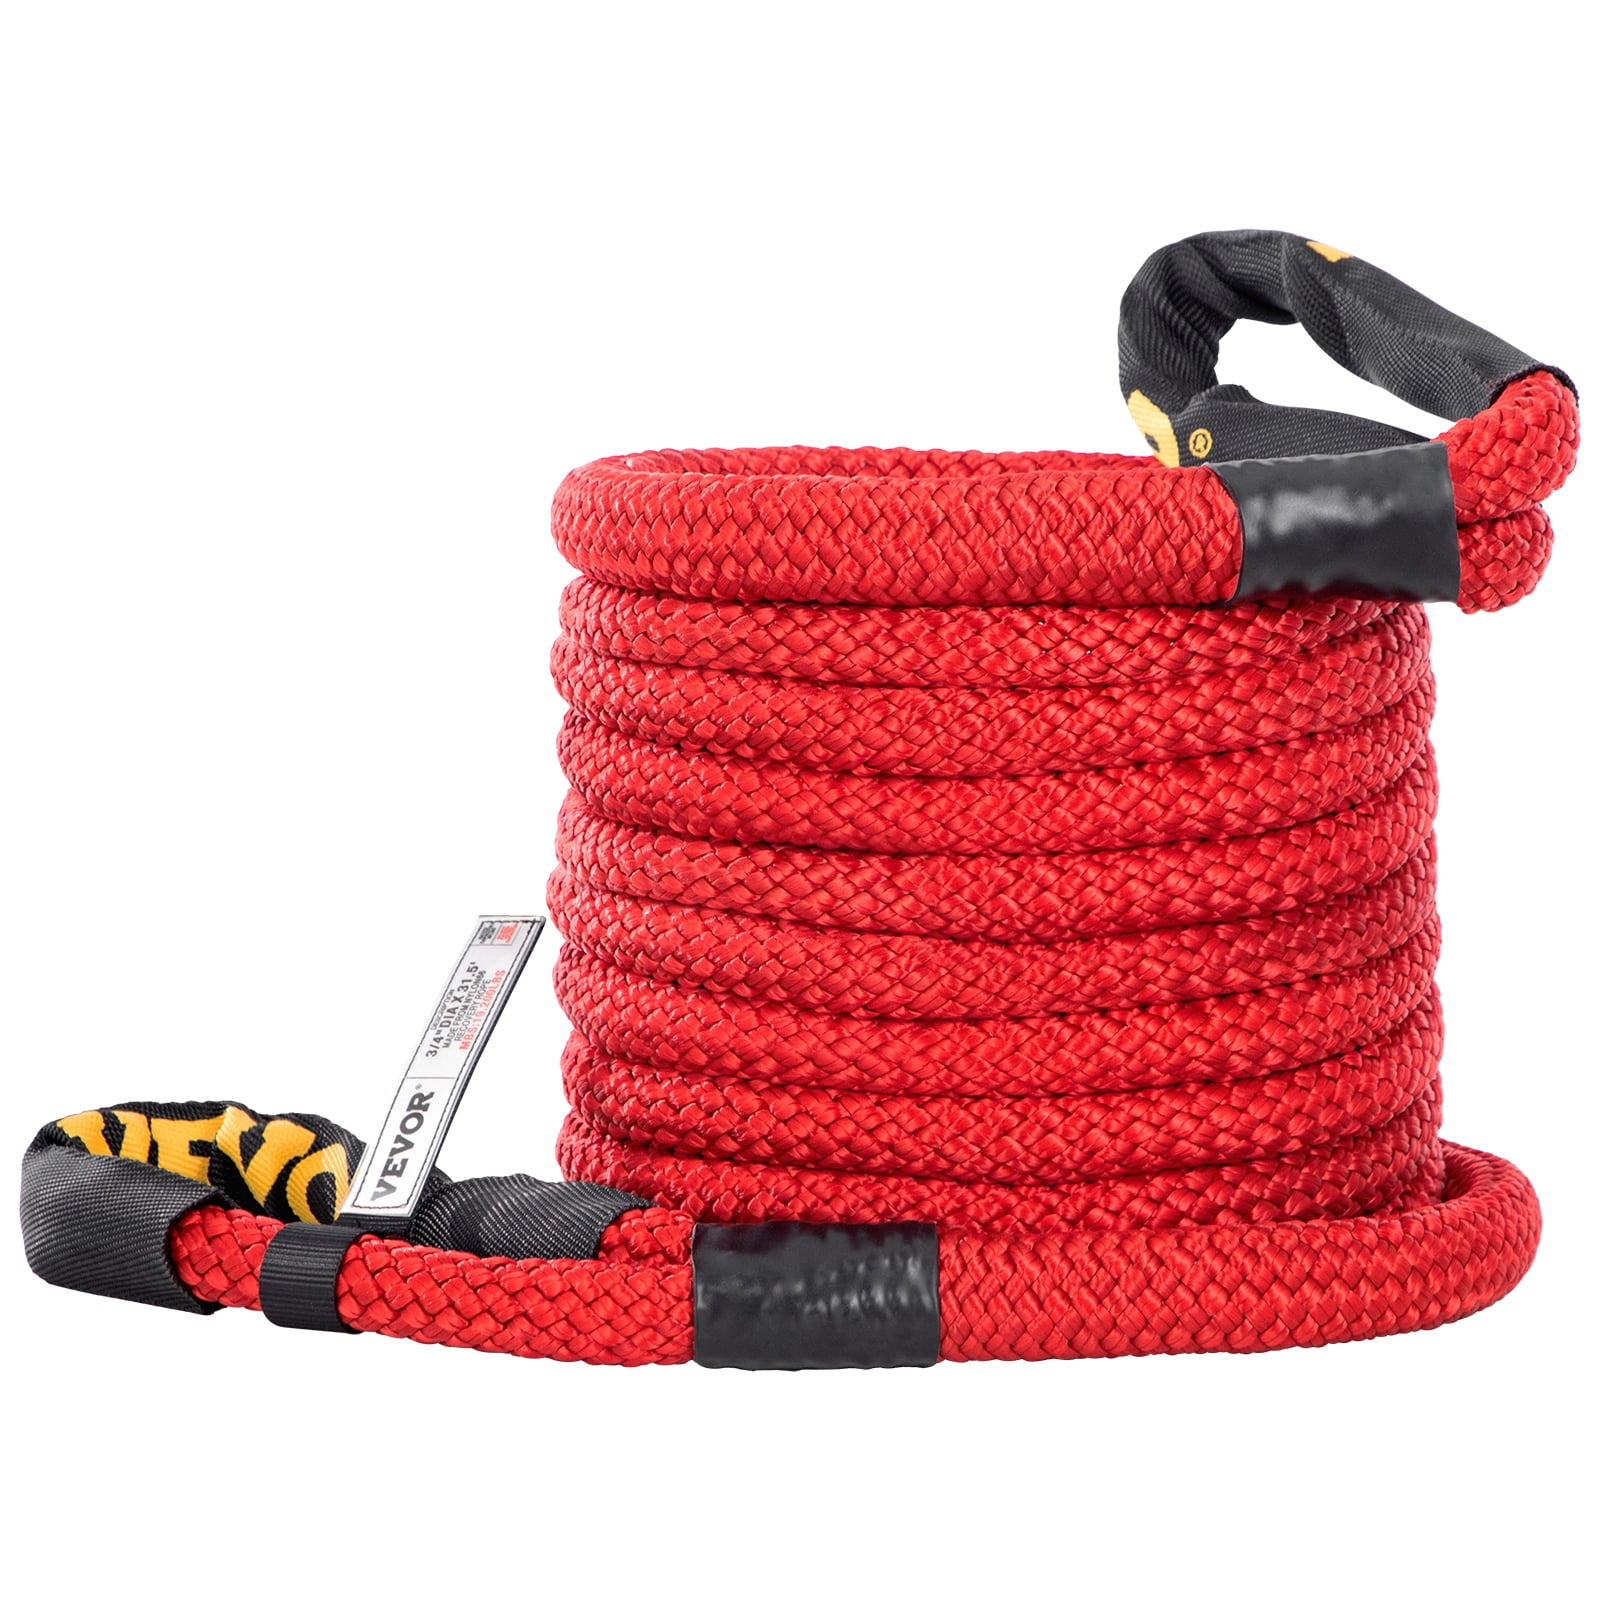 VEVOR 7/8 x 21' Recovery Tow Rope, 21,970 lbs, Heavy Duty Nylon Double  Braided Kinetic Energy Rope w/ Loops and Protective Sleeves, for Truck